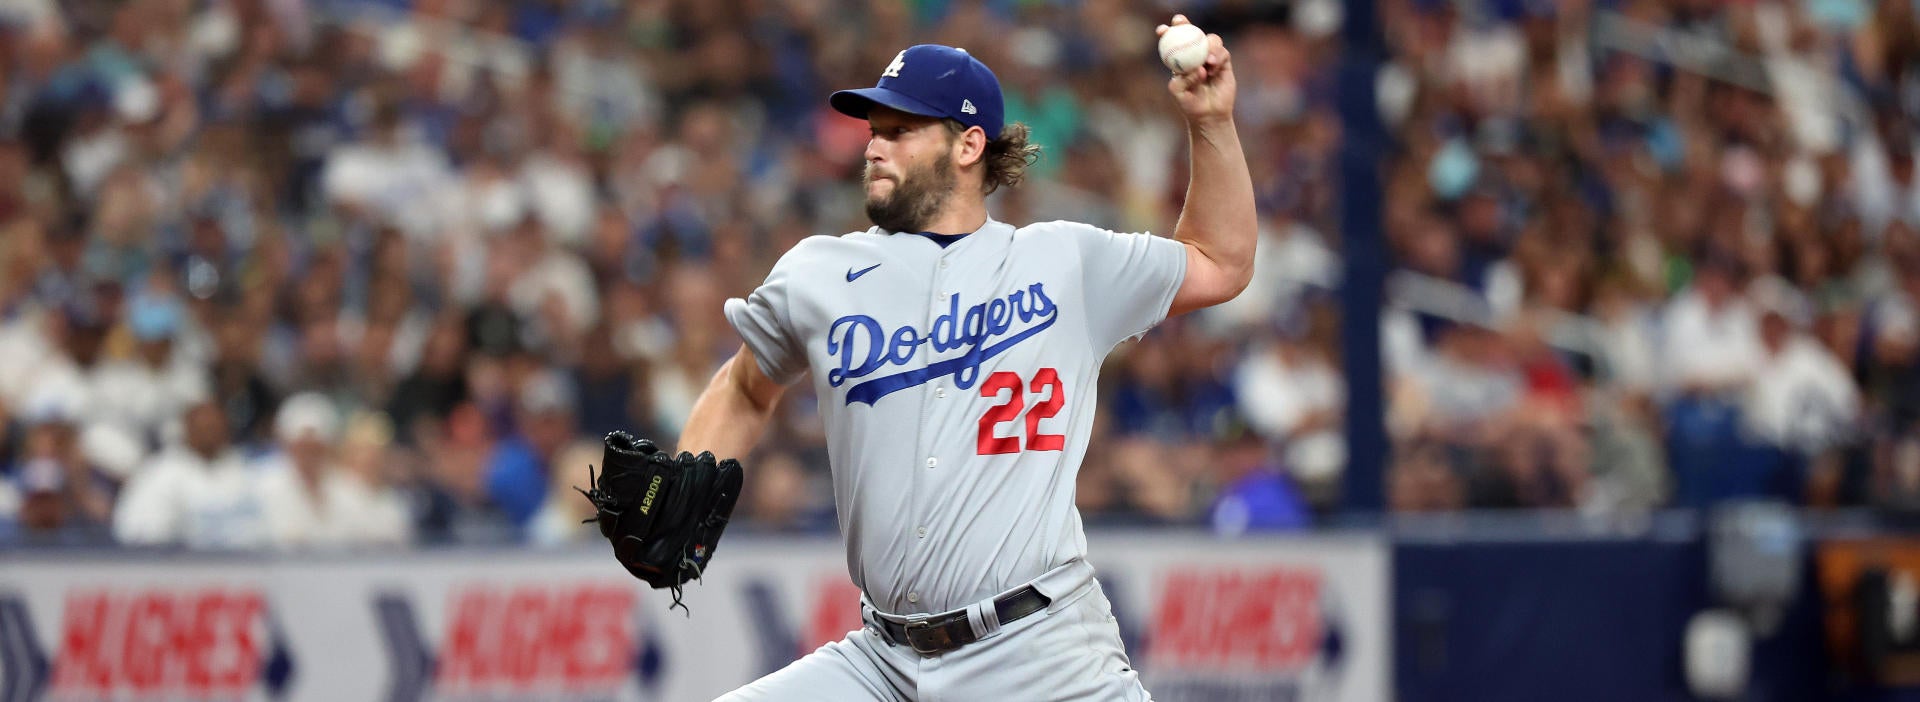 MLB prop picks: PropStarz's picks and strikeout projections for today, including Clayton Kershaw vs. Yankees